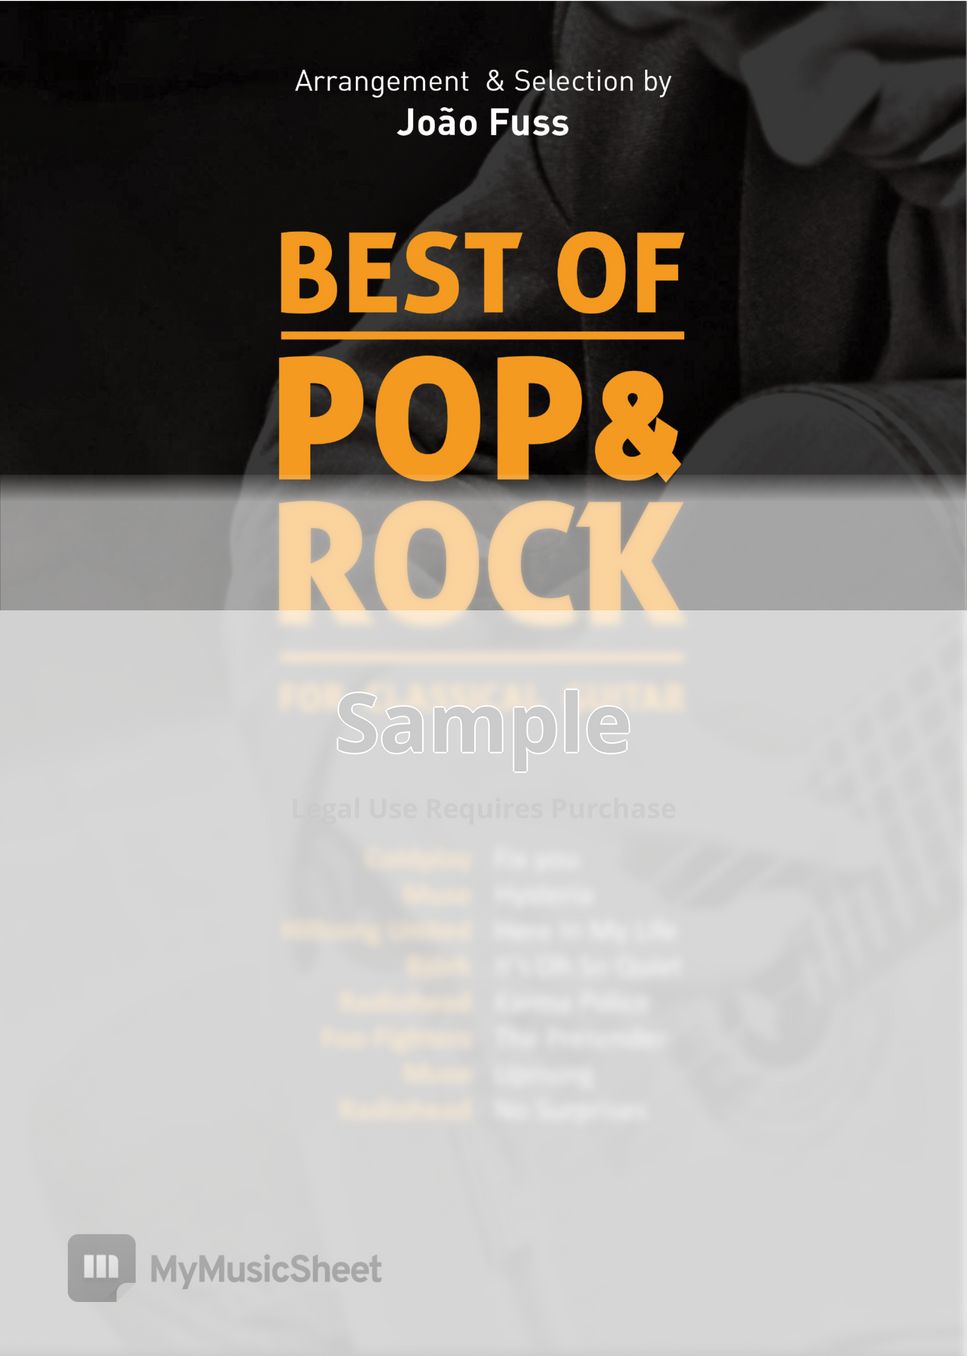 No Surprises - Radiohead - The Best of Pop/Rock for Classical Guitar by João Fuss